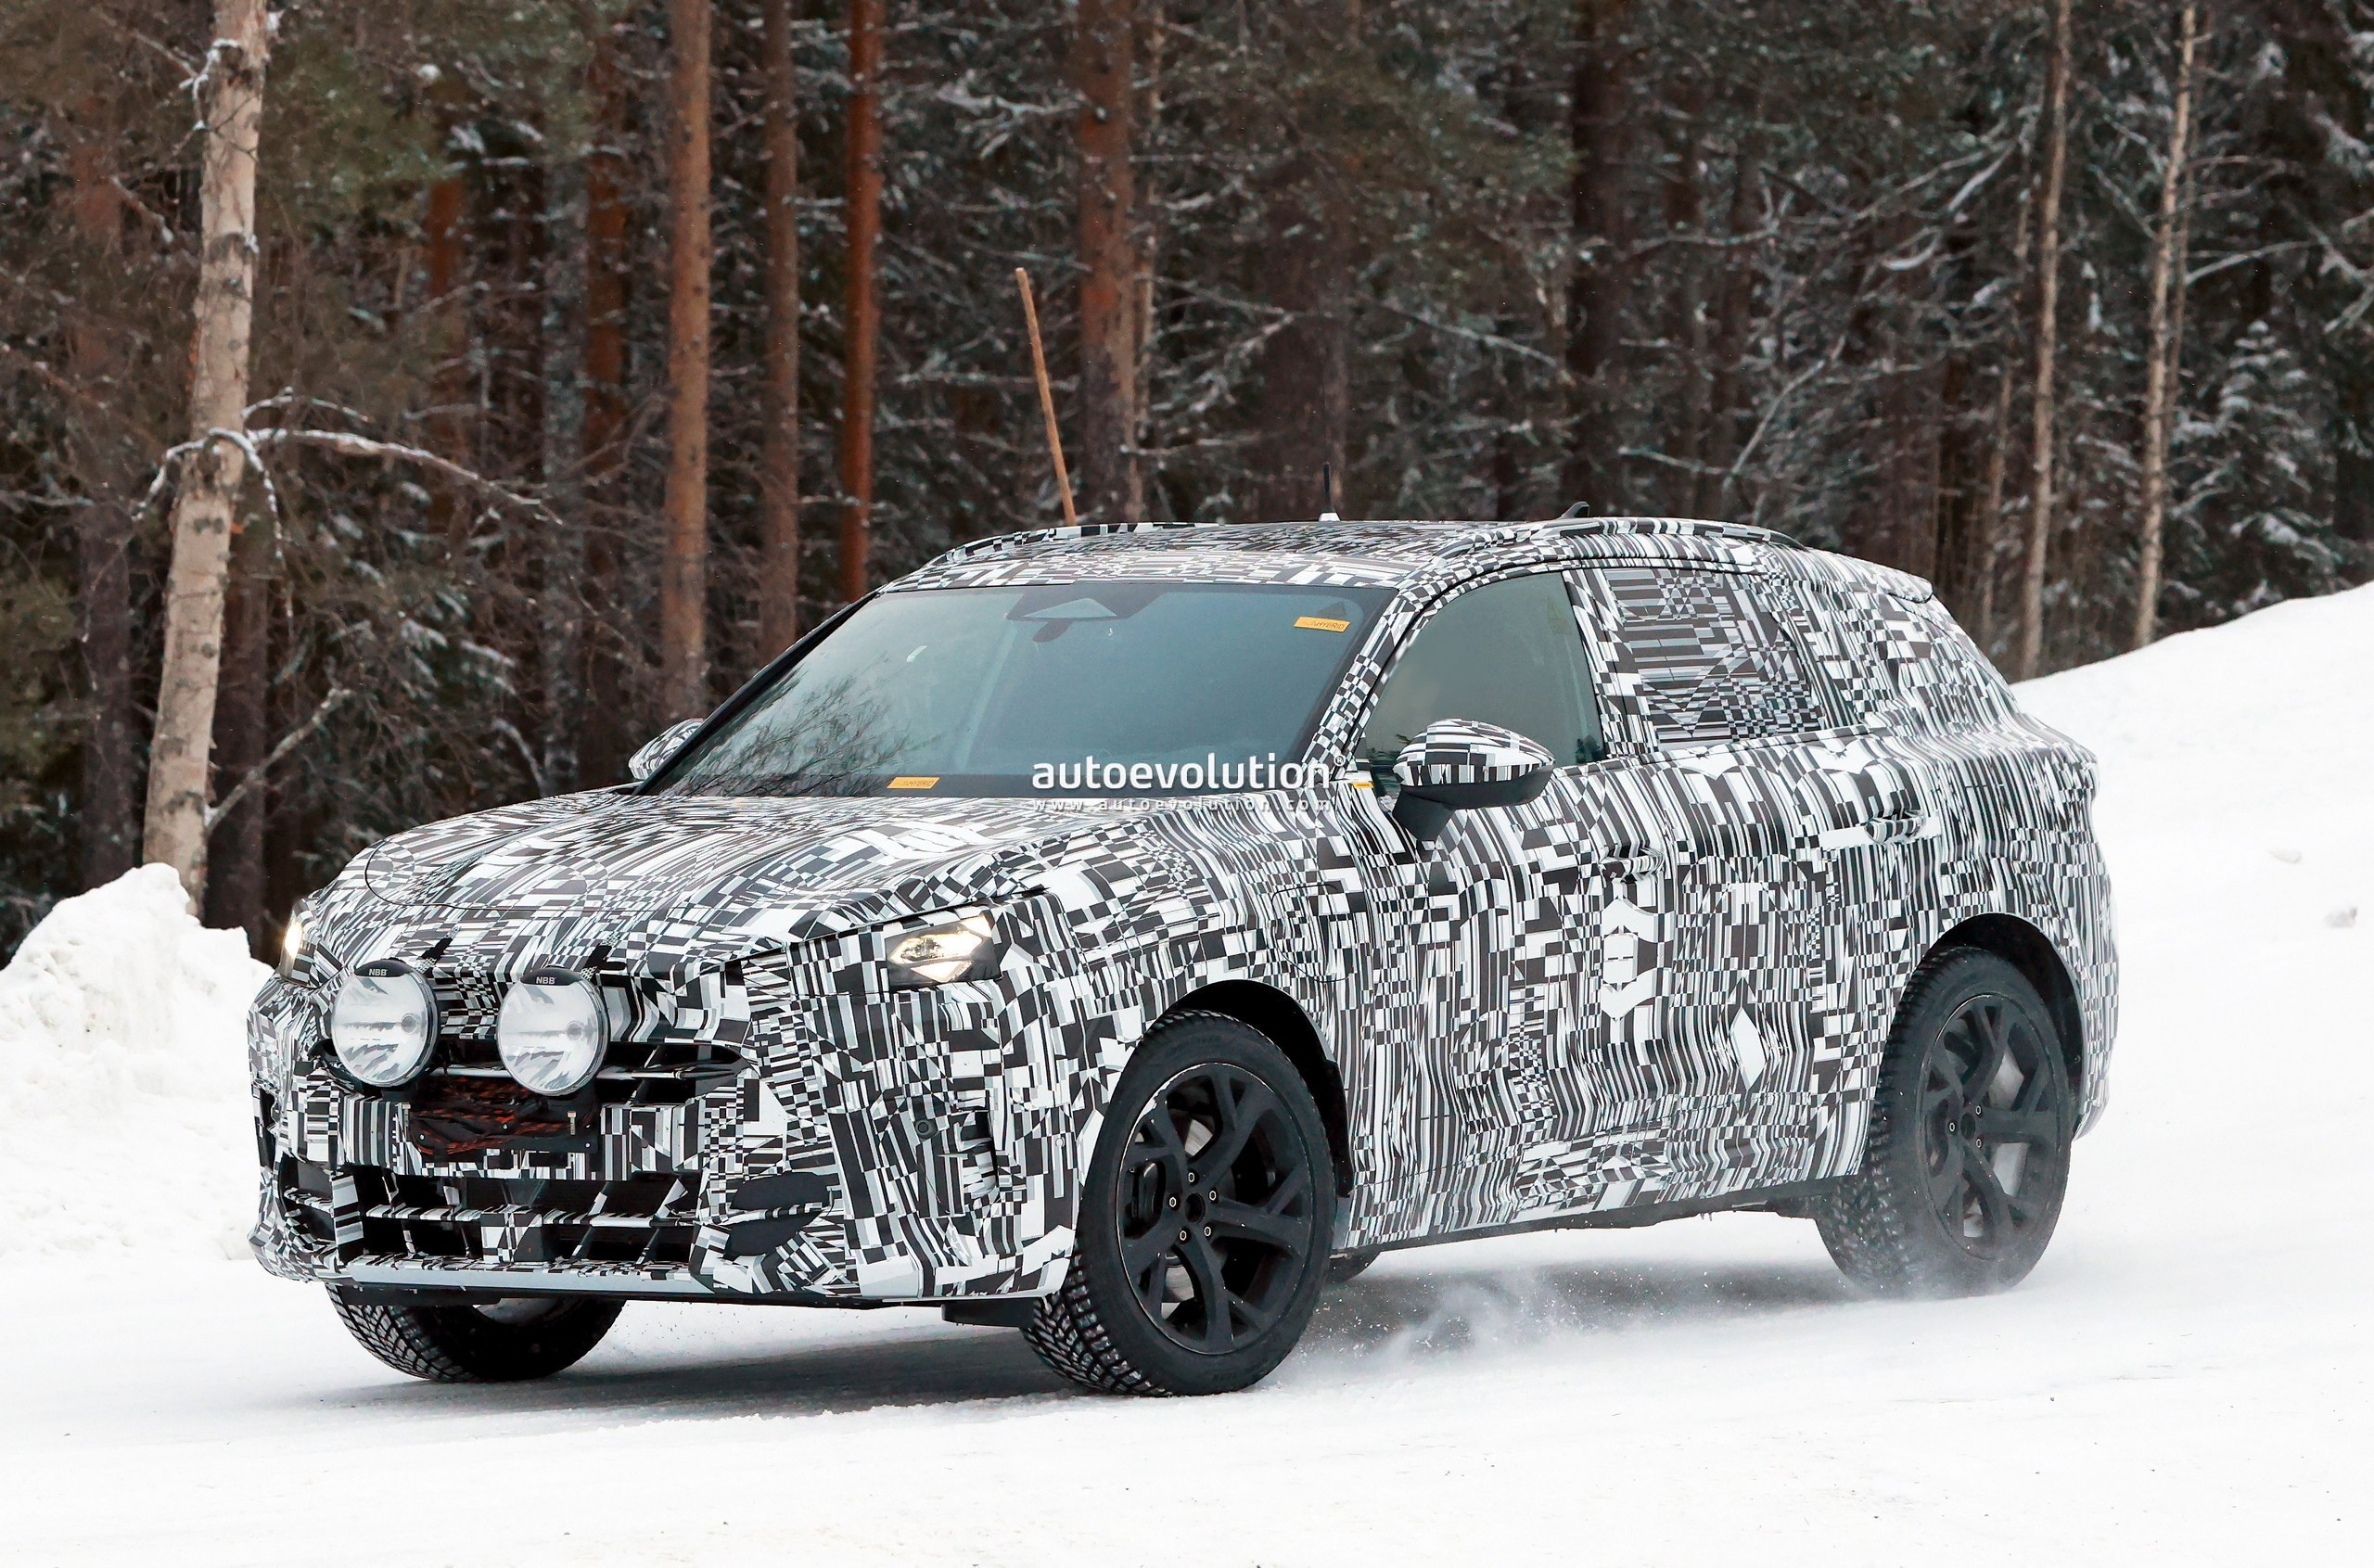 VW's Cupra will launch sporty hybrid SUV based on the Audi Q3